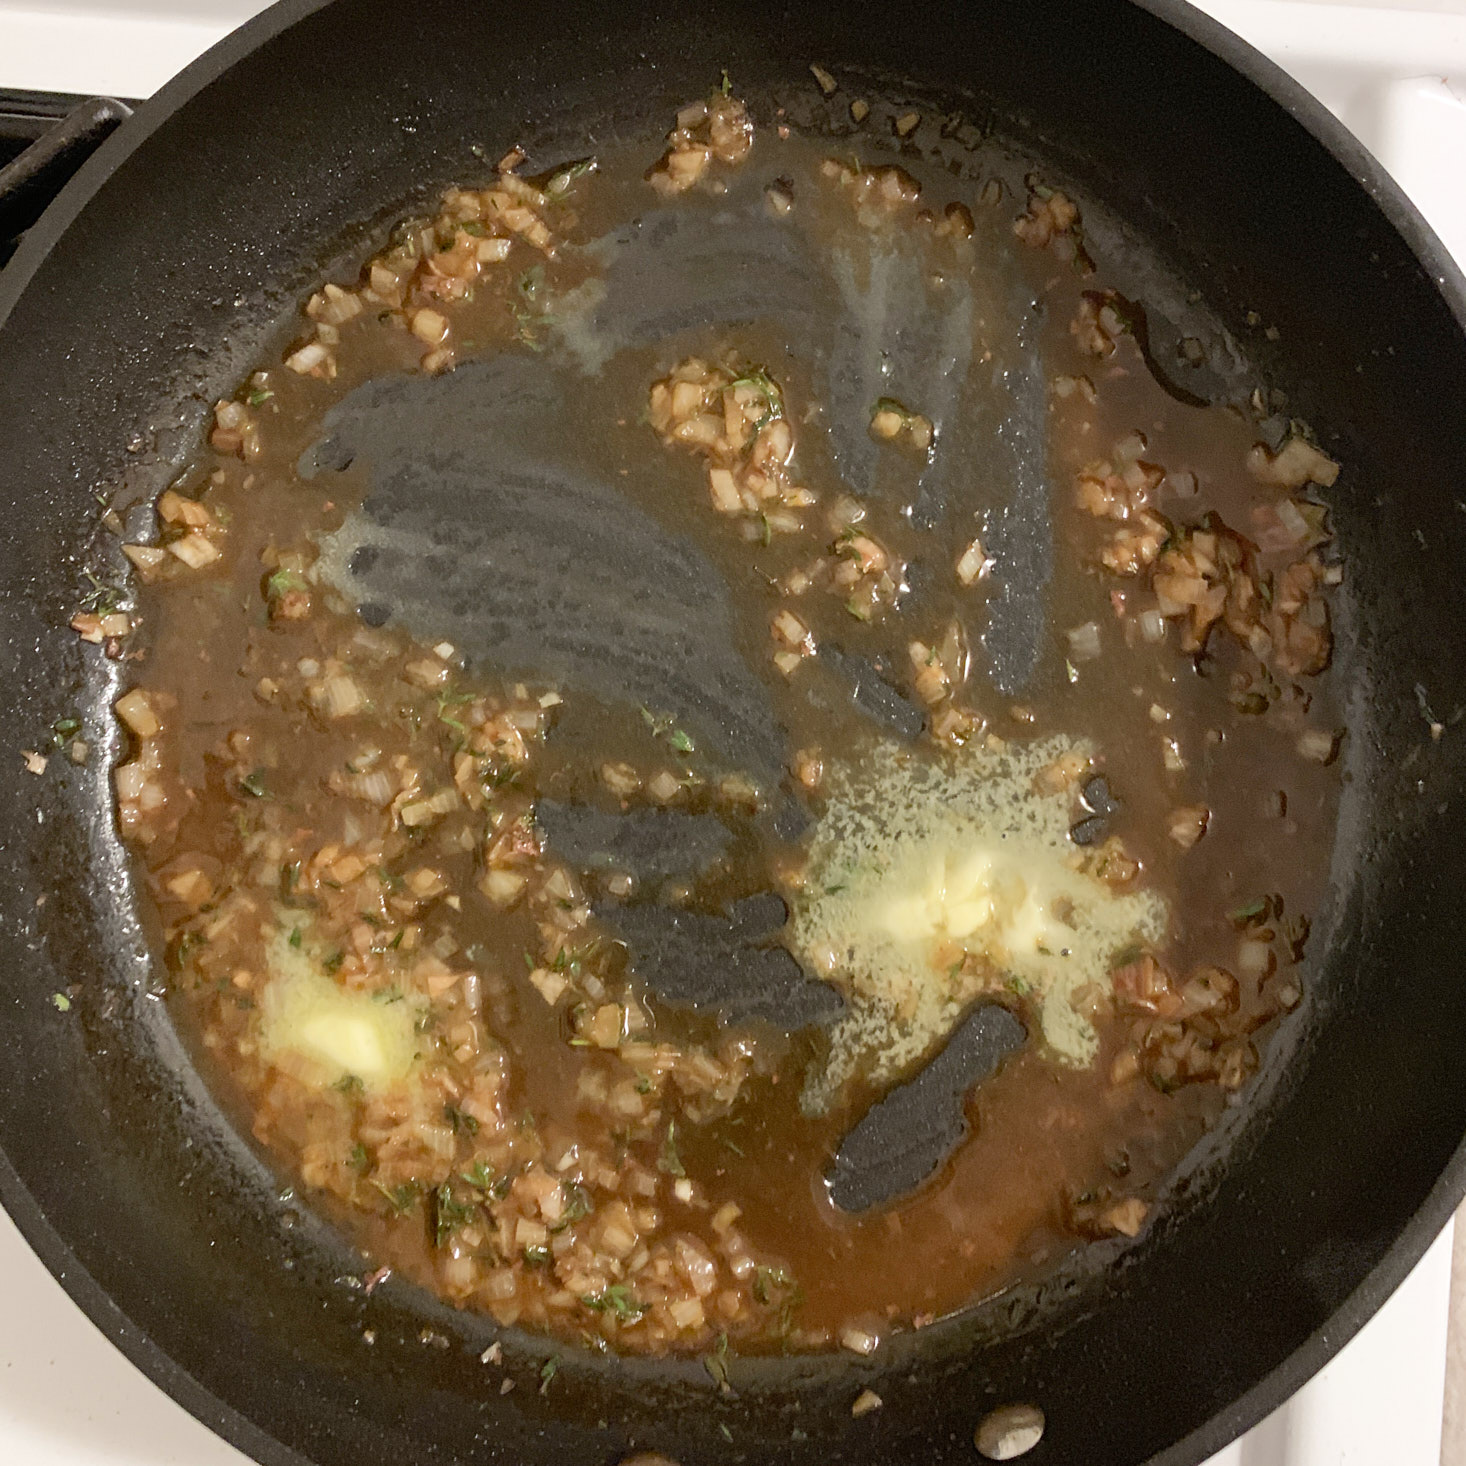 shallot, thyme, stock, and butter in pan